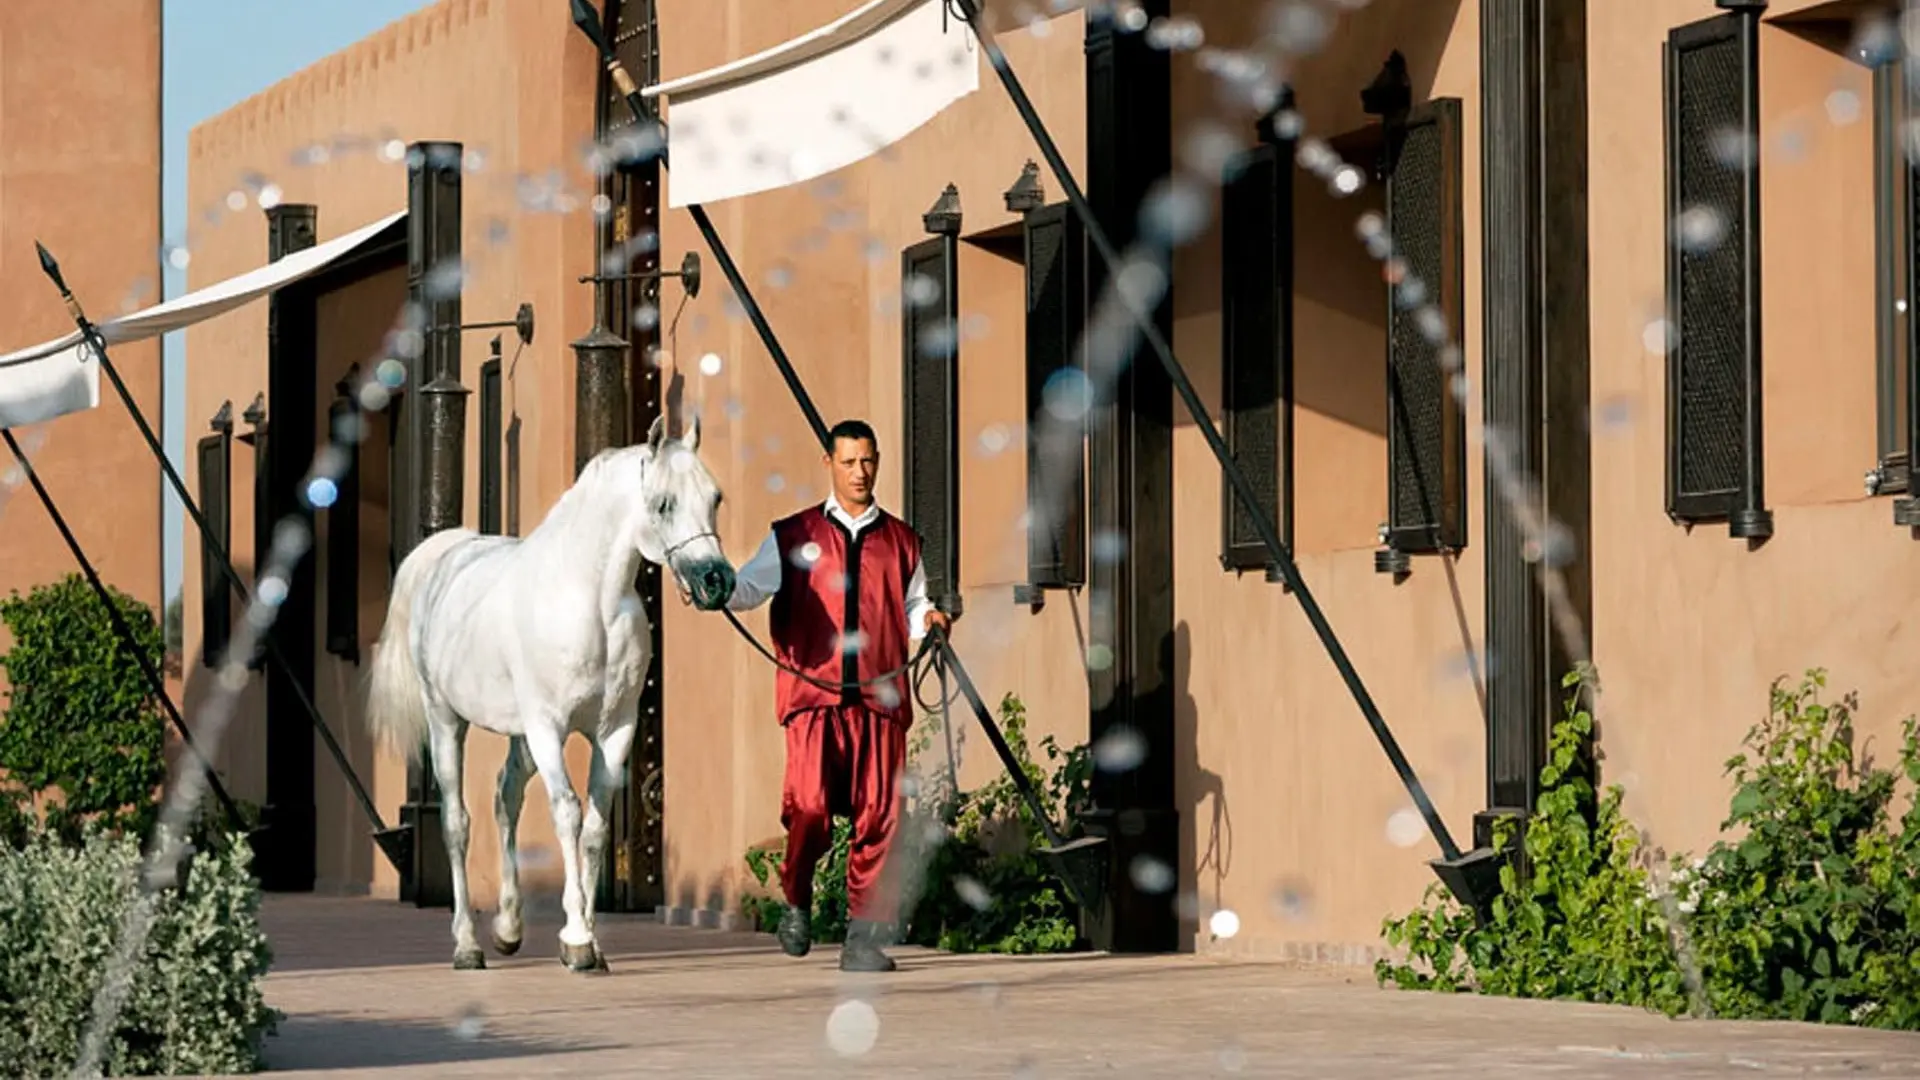 A white horse walked by a man in red through street.